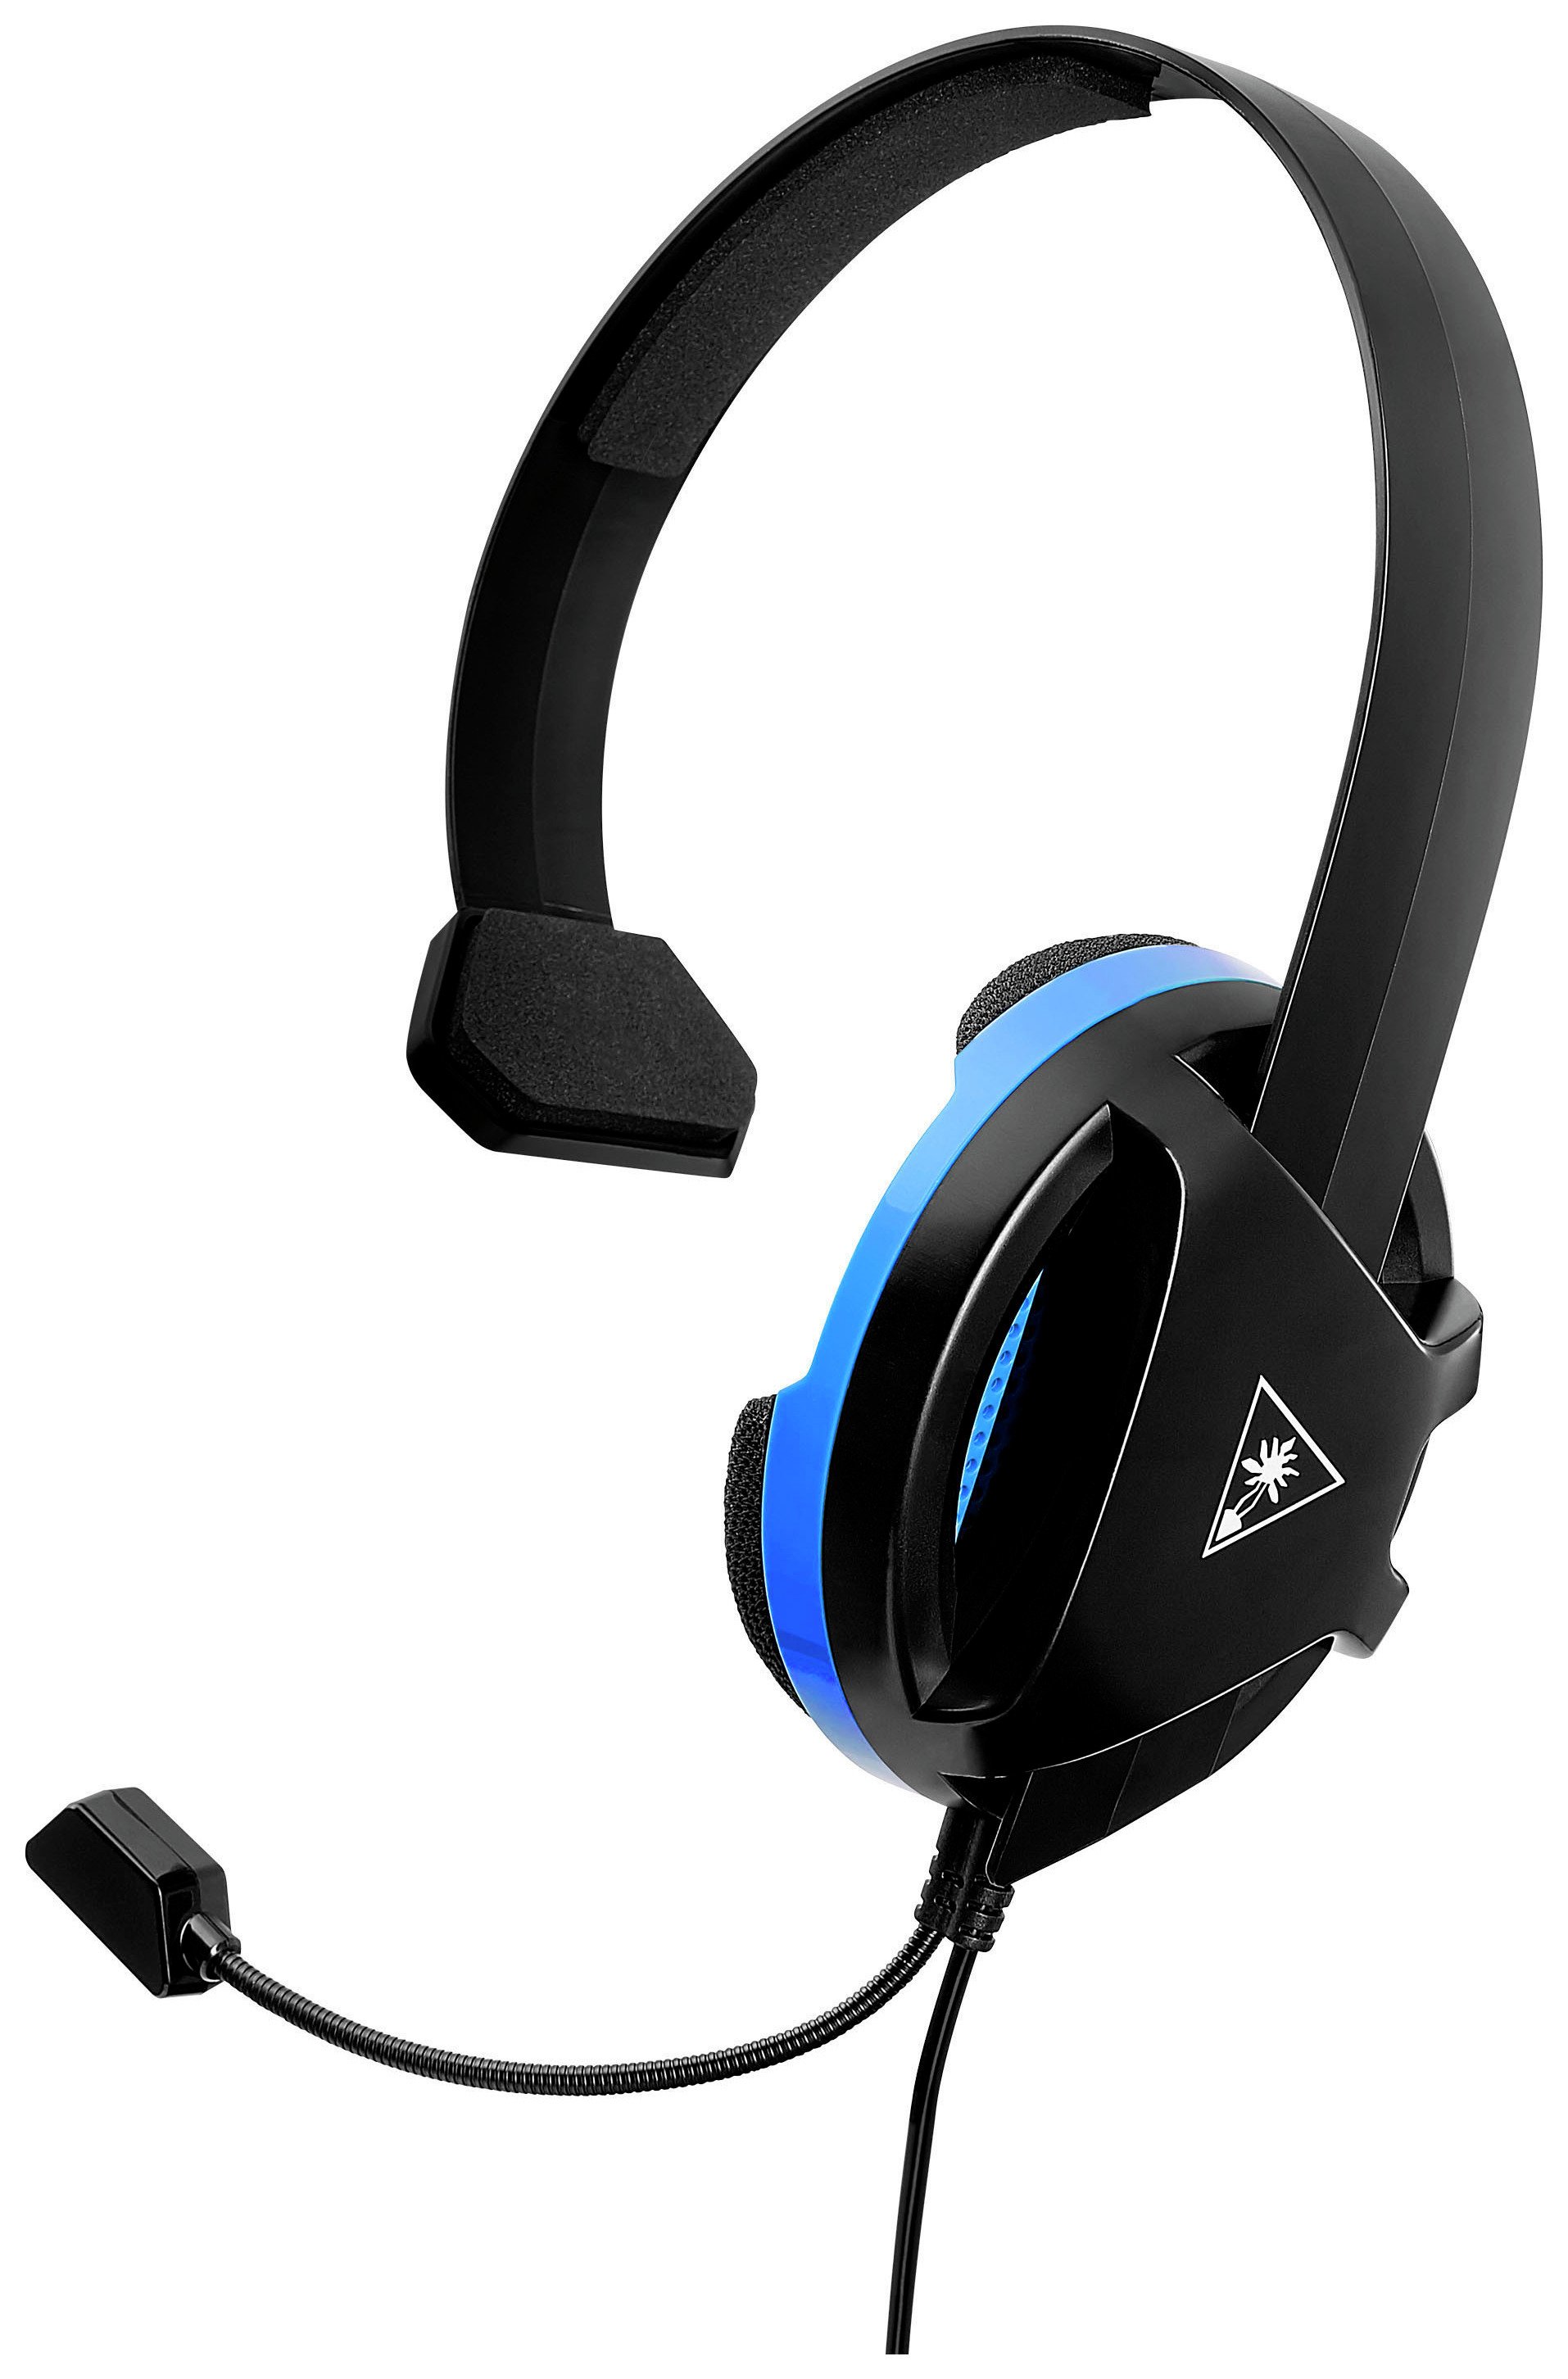 recon headset ps4